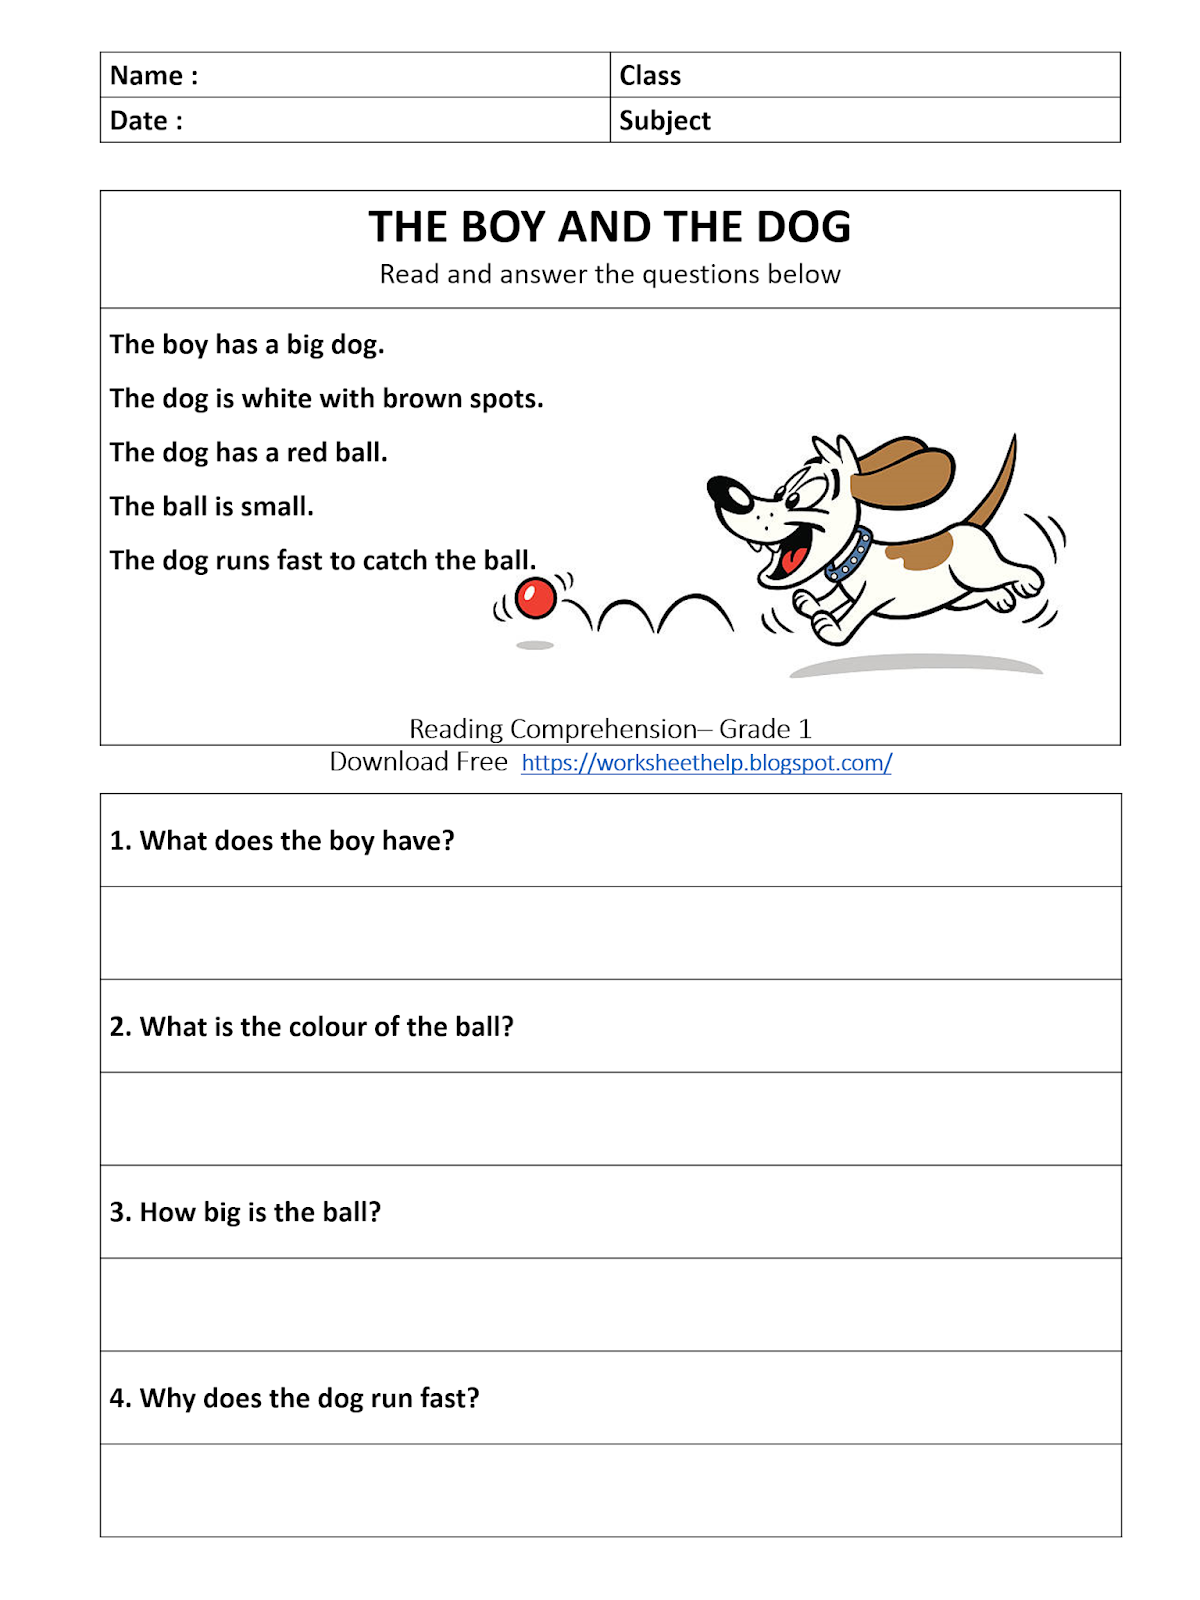 reading-comprehension-worksheet-grade-1-boy-and-dog-clipart-creationz